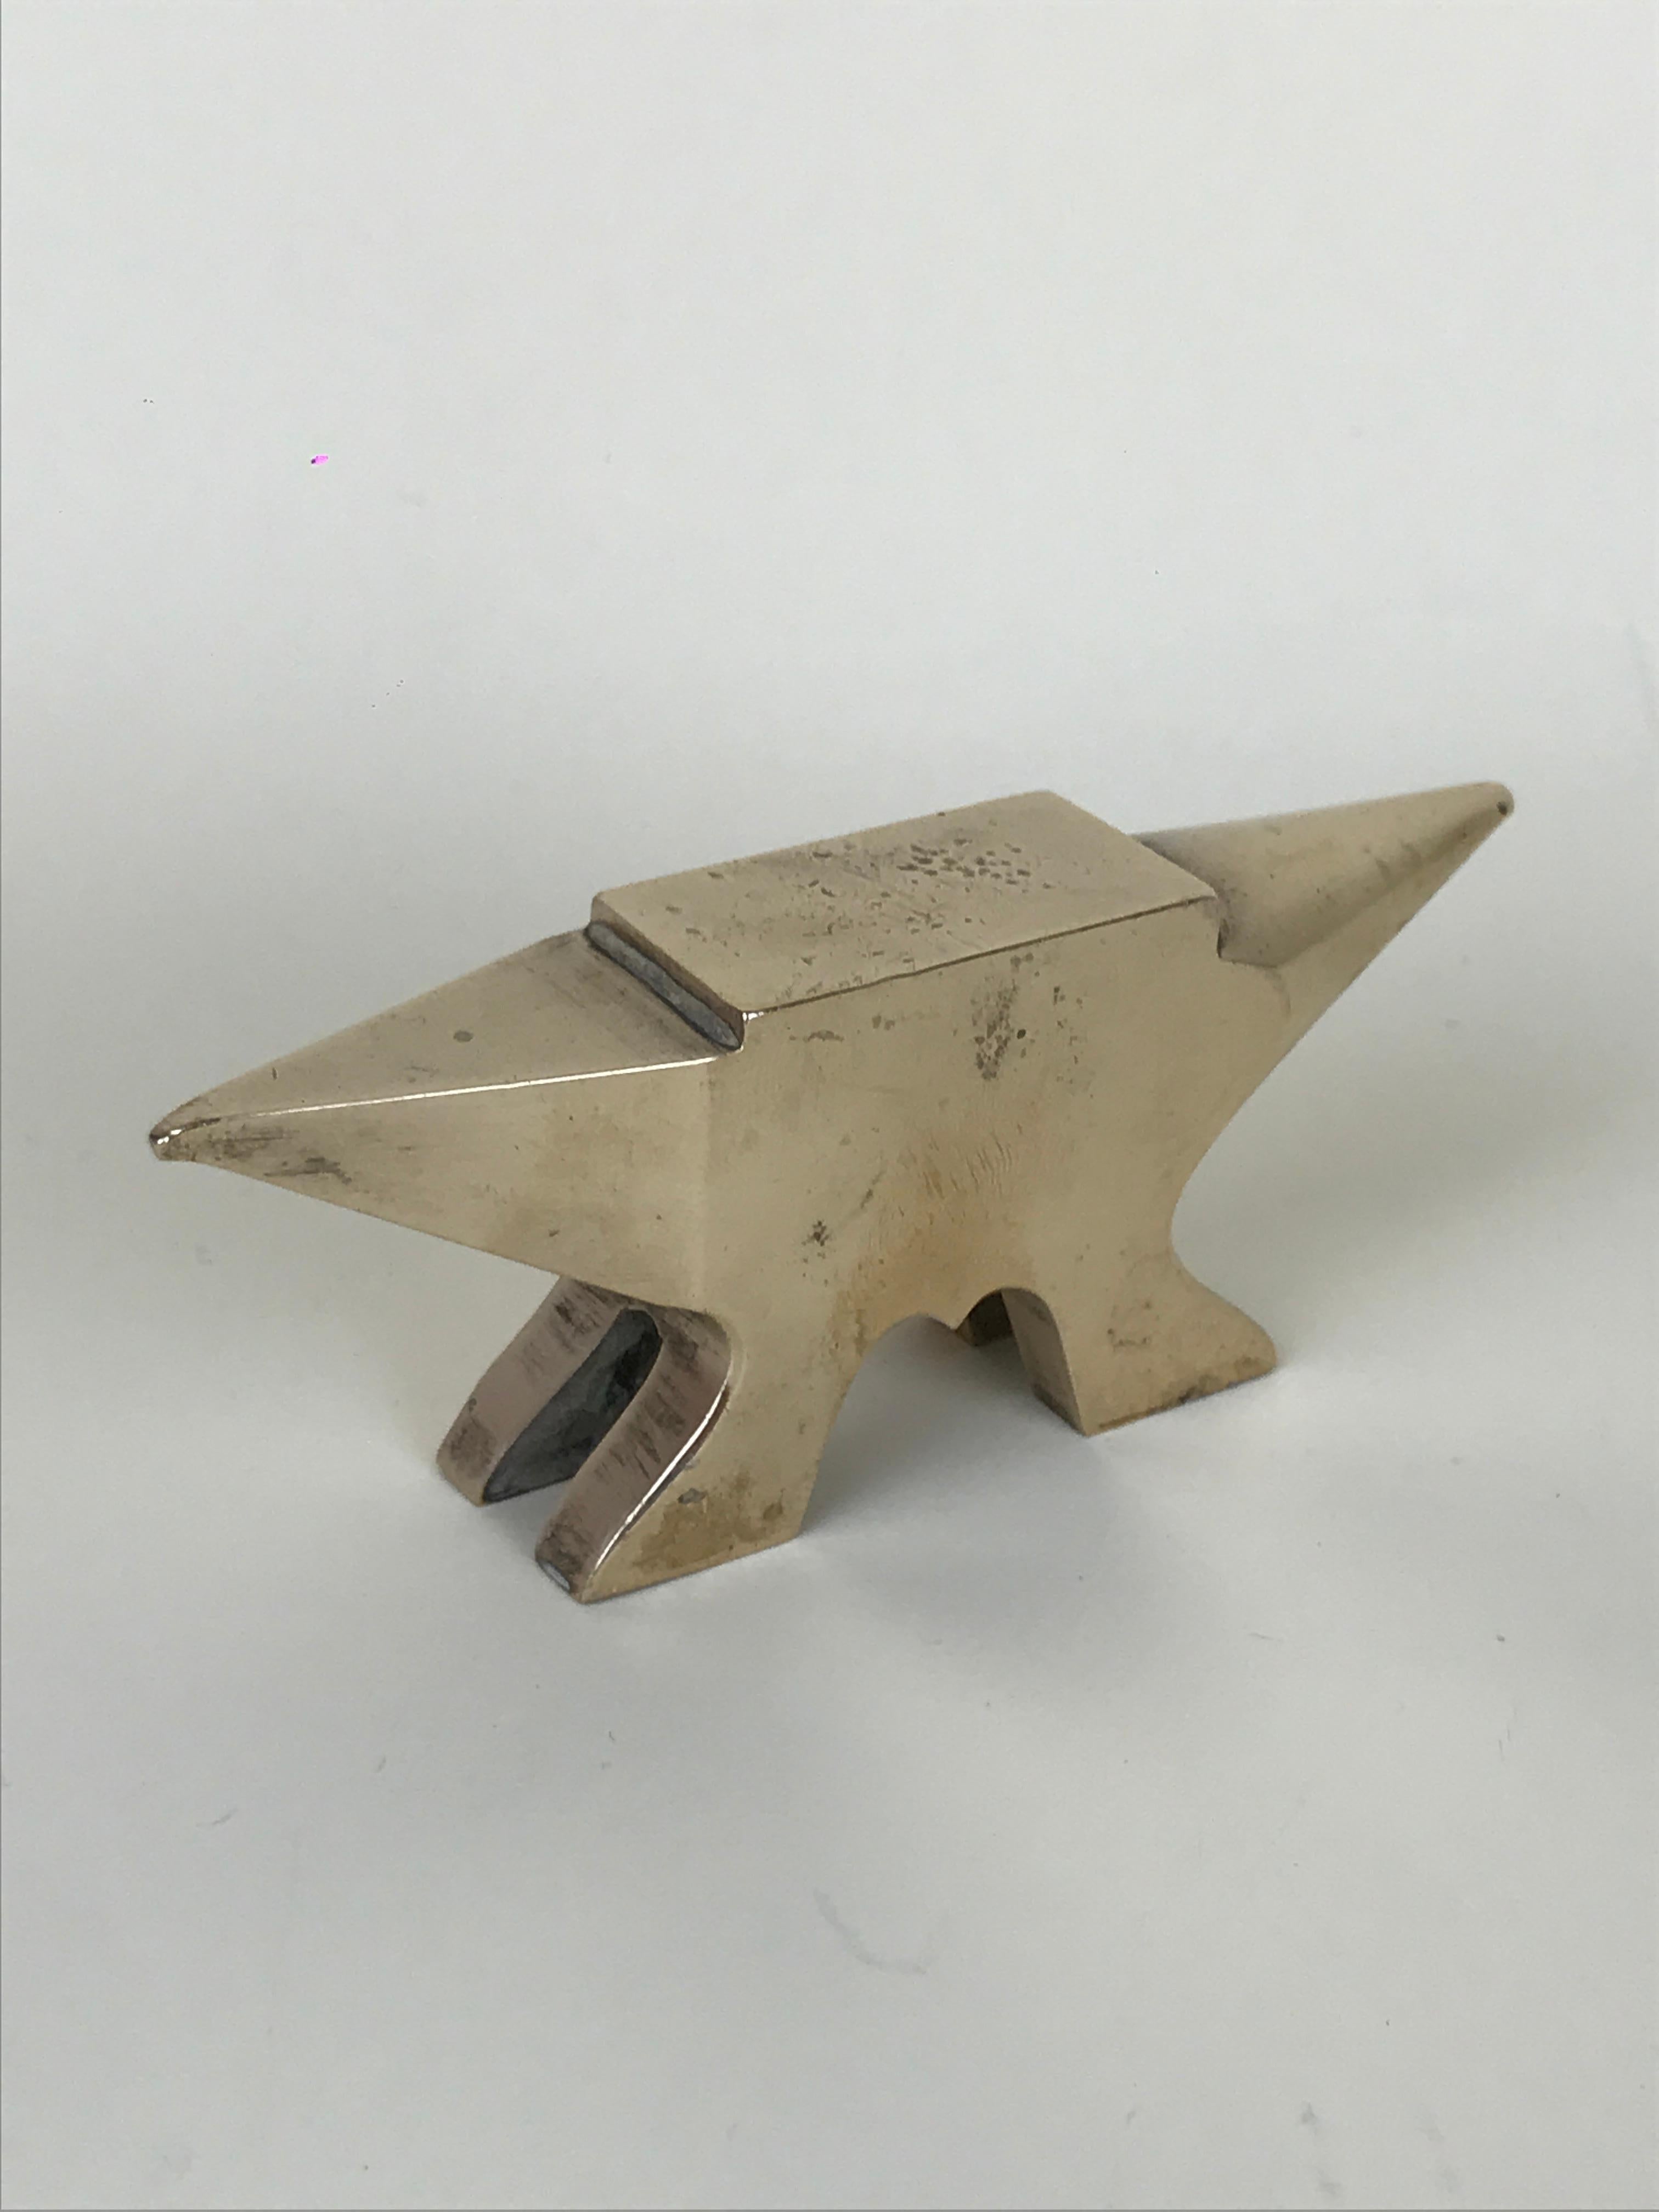 Vintage bronze little anvil made in Italy in the 1940s.